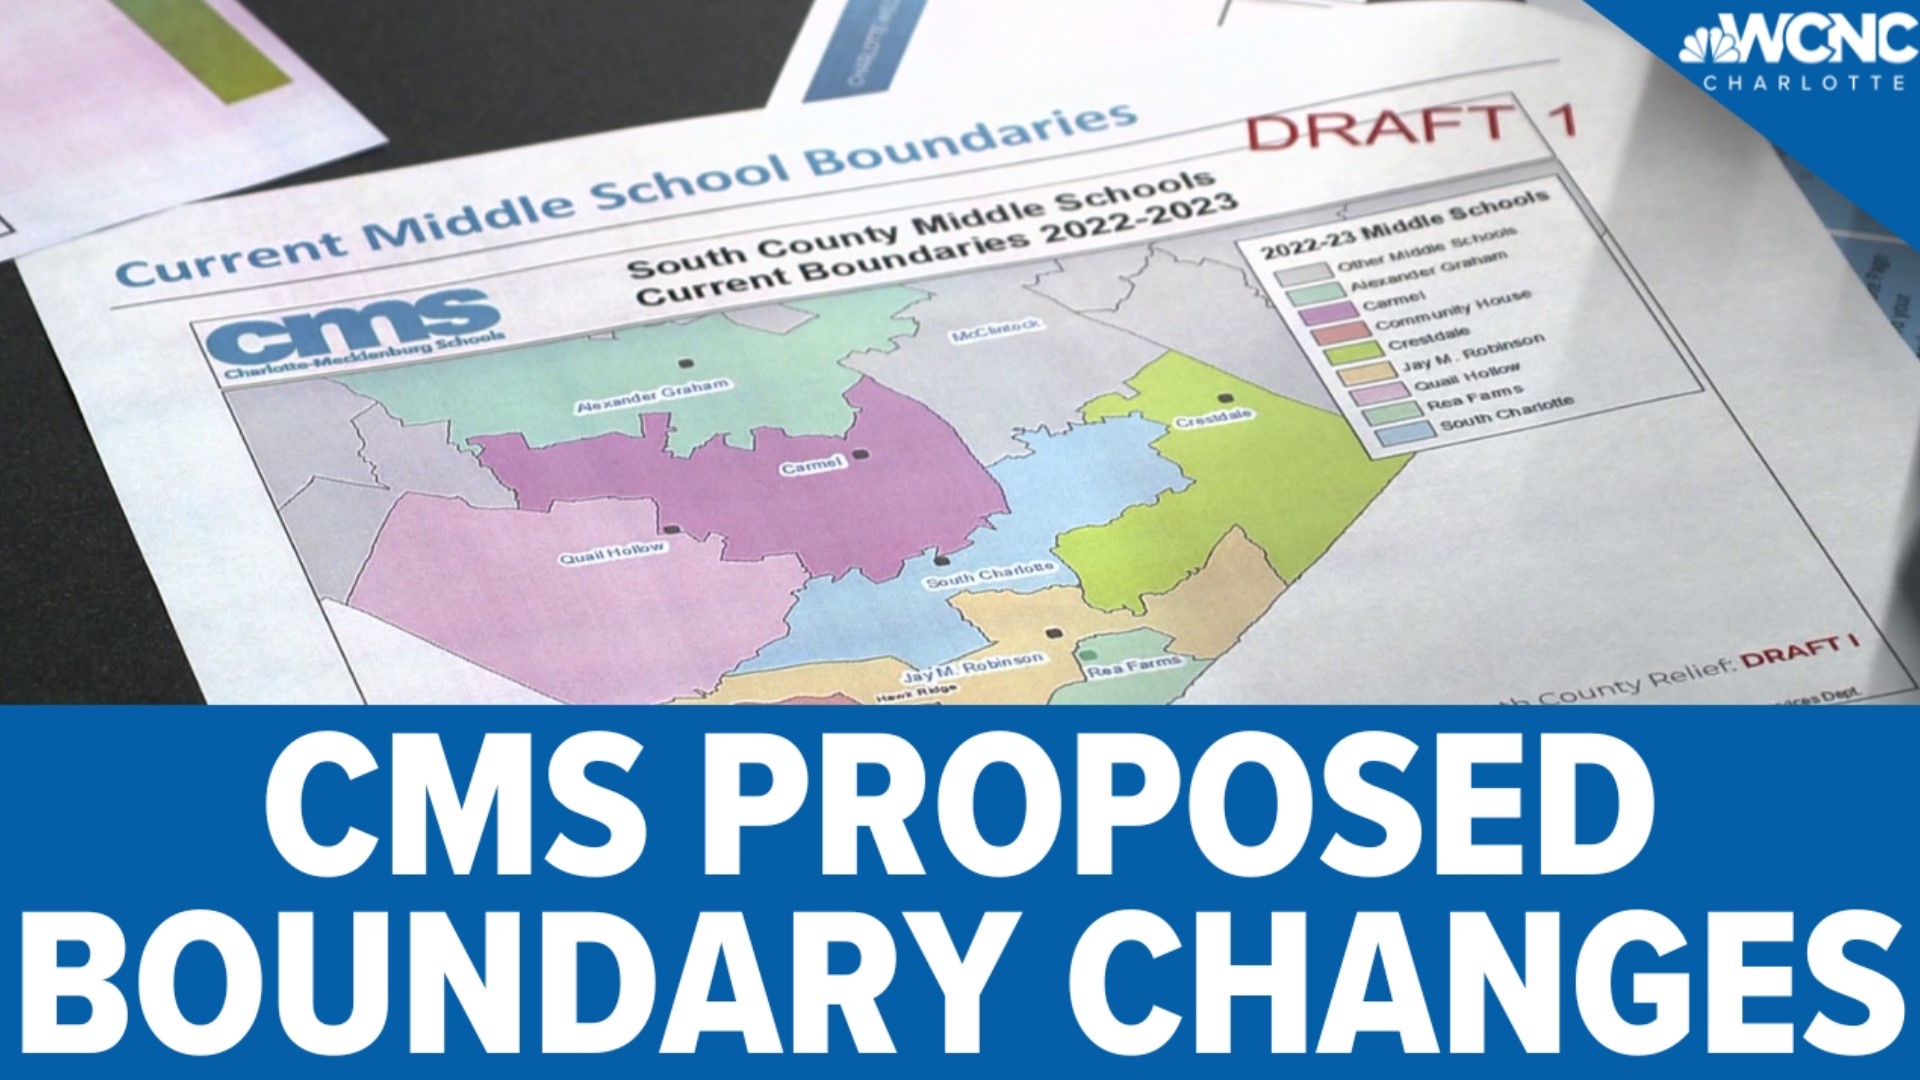 CMS hosted another information session on its proposed boundary changes to make room for the new high school and middle school being built.